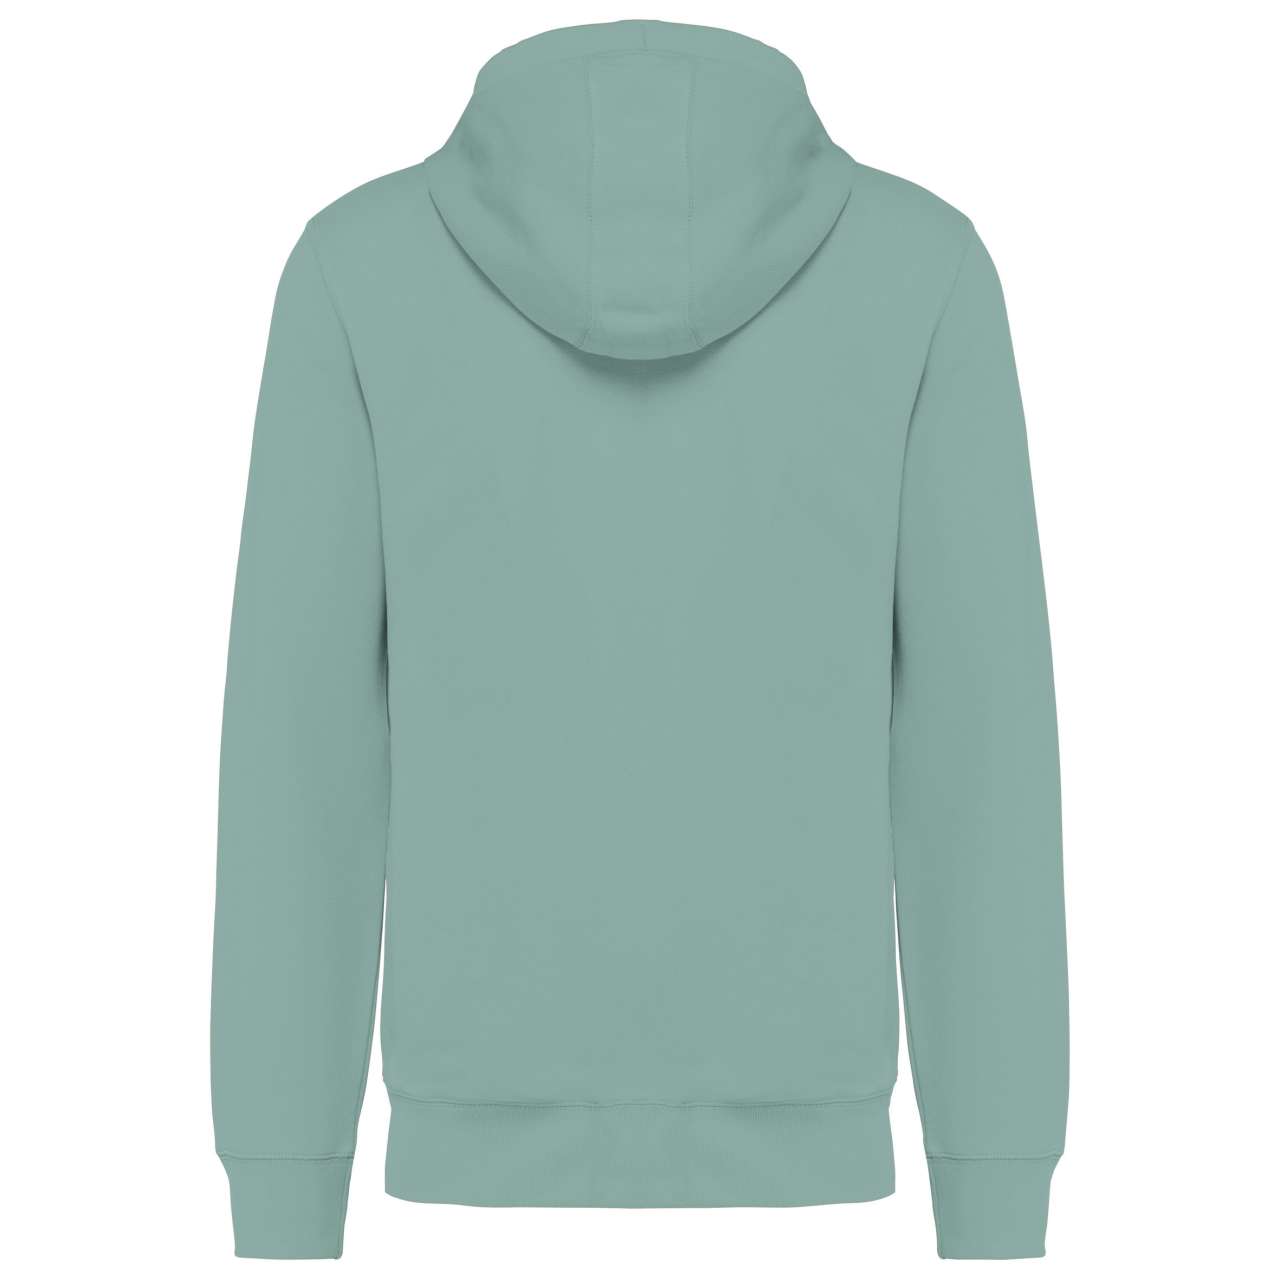 UNISEX ECO-FRIENDLY FRENCH TERRY HOODIE